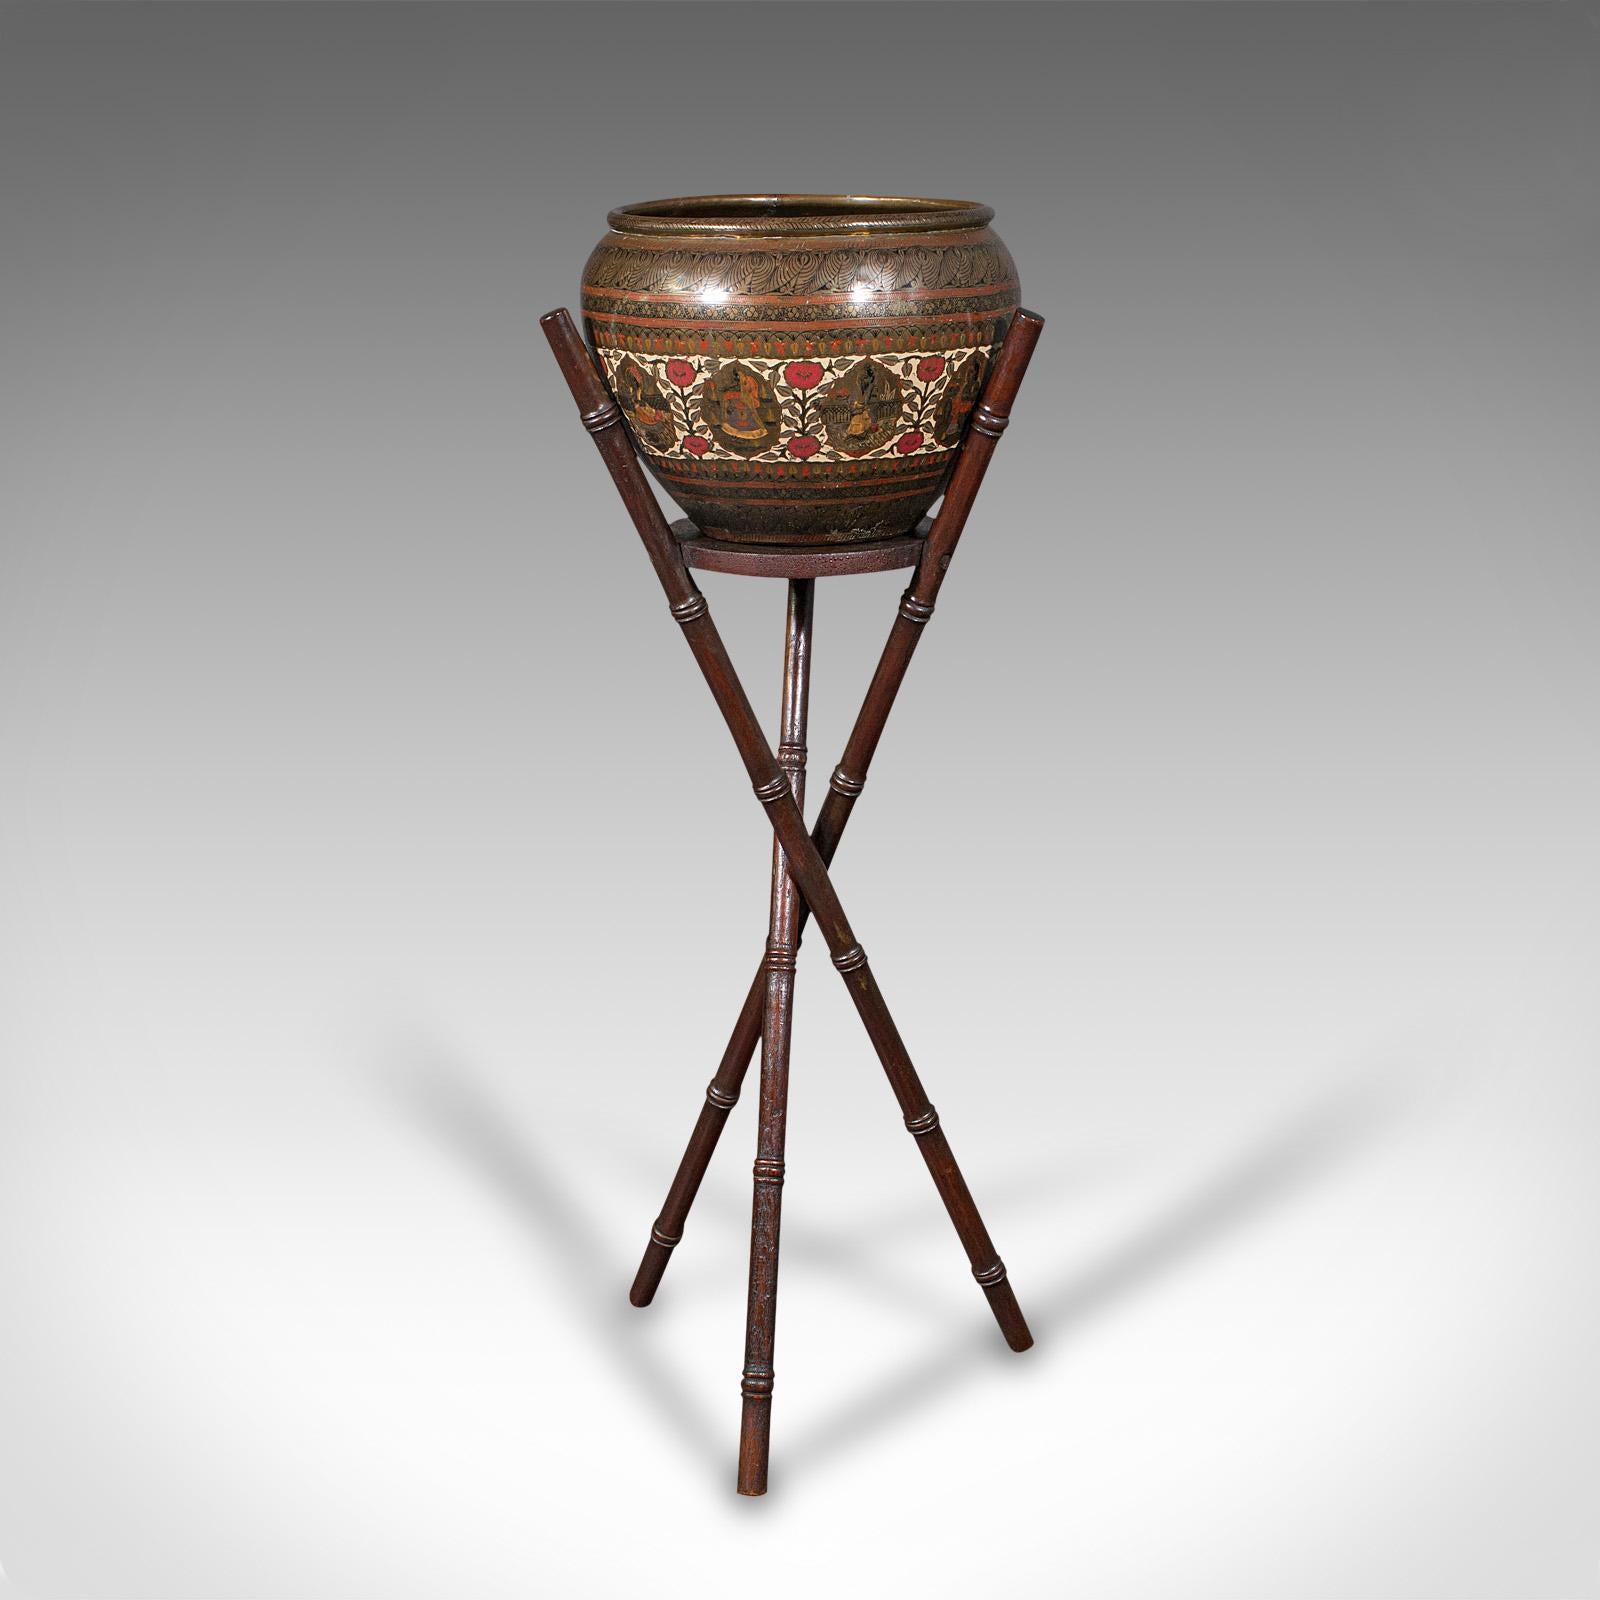 This is an antique hand etched planter stand. A Colonial Indian, decorative brass jardiniere, dating to the Victorian period, circa 1900.

Adorned with copious detail and charm
Displays a desirable aged patina and in good order
Hand-etched and